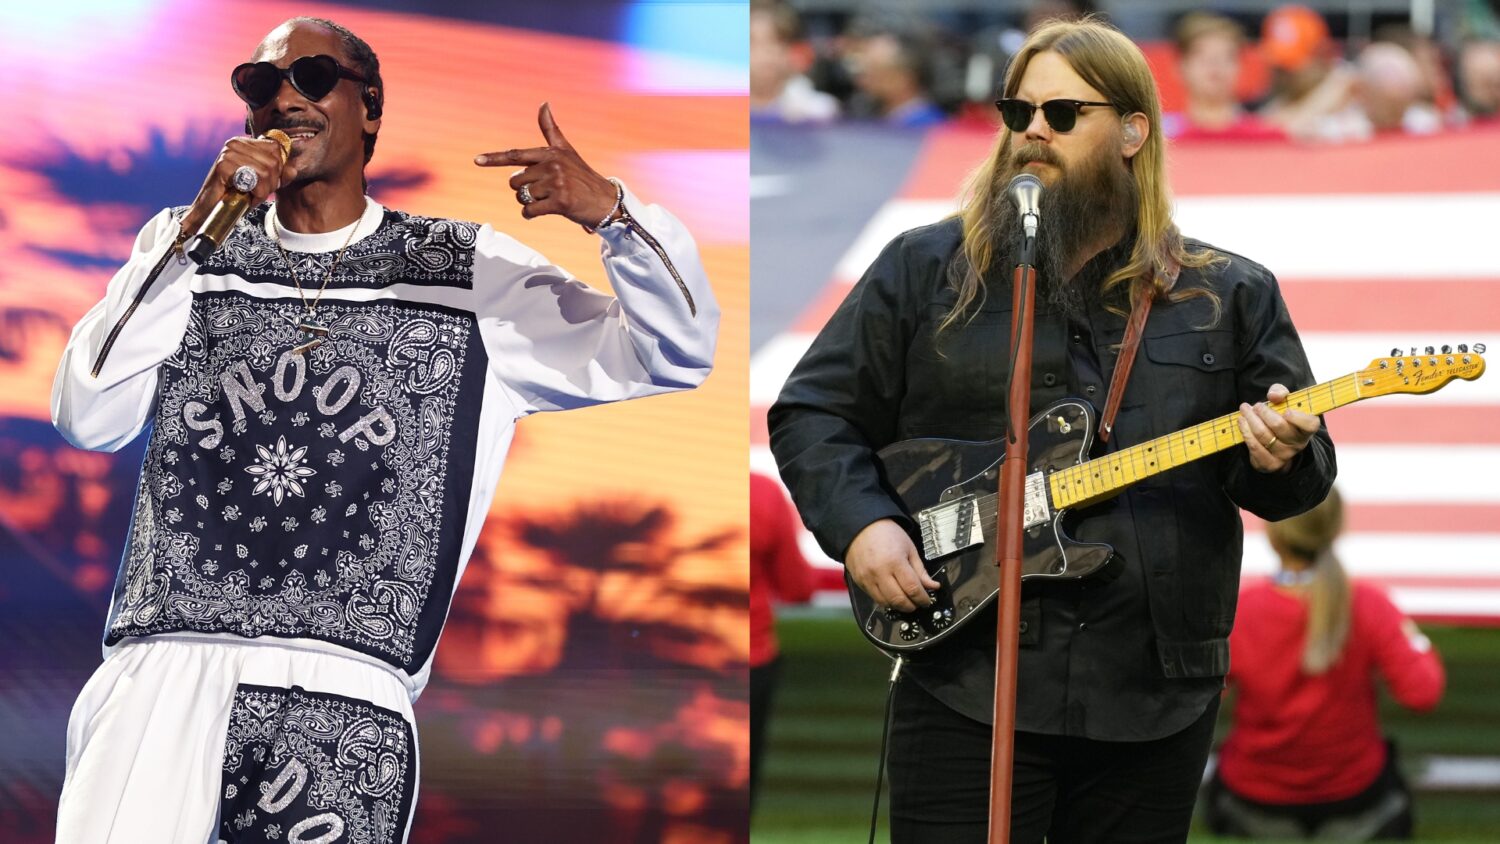 Snoop Dogg and Chris Stapleton Team Up for Unexpected Phil Collins Cover